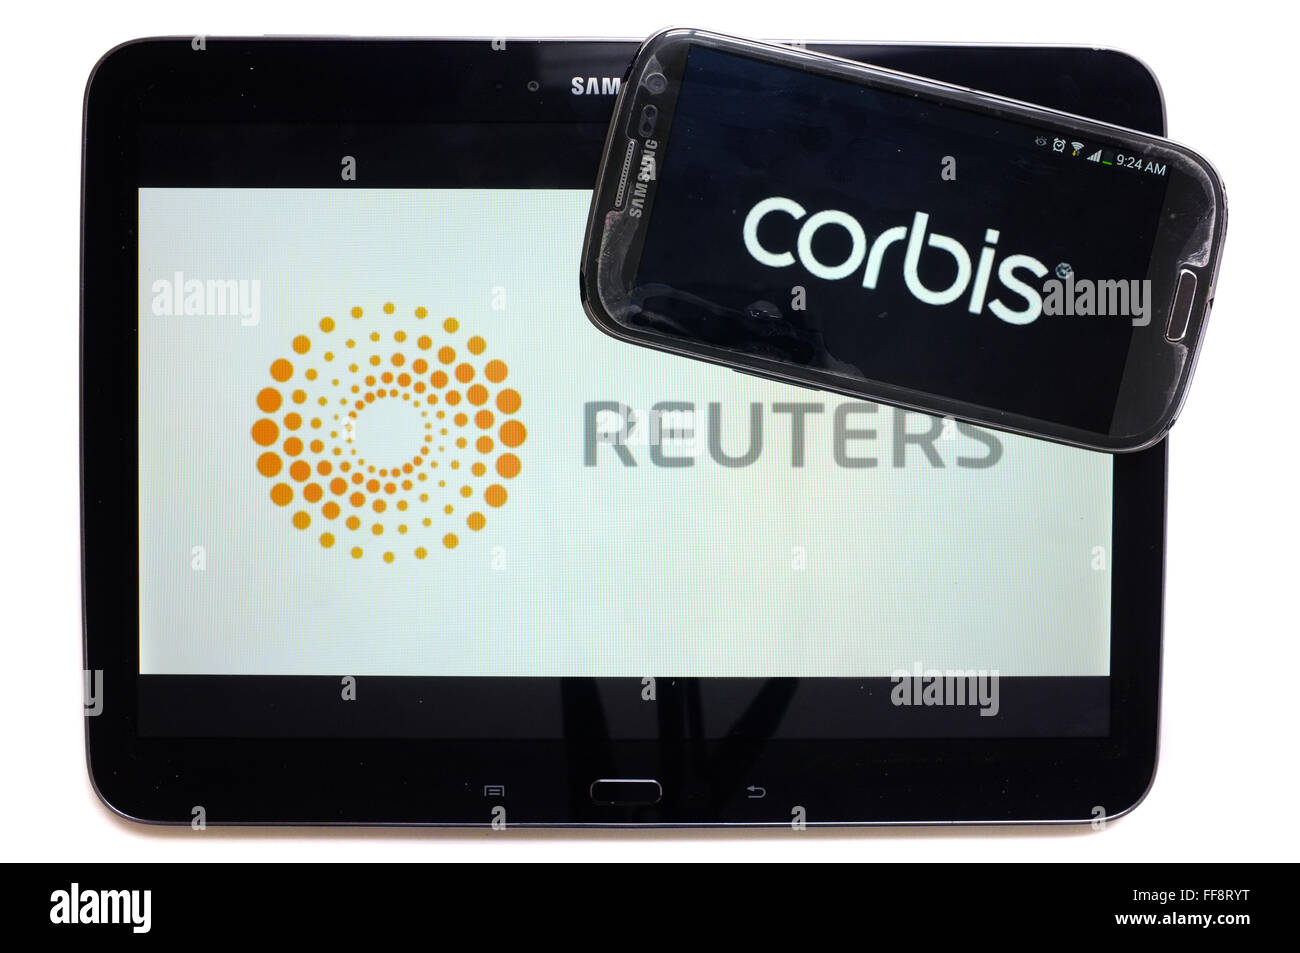 The news agencies Corbis and Reuters on the screens of a tablet and a smartphone photographed against a white background. Stock Photo